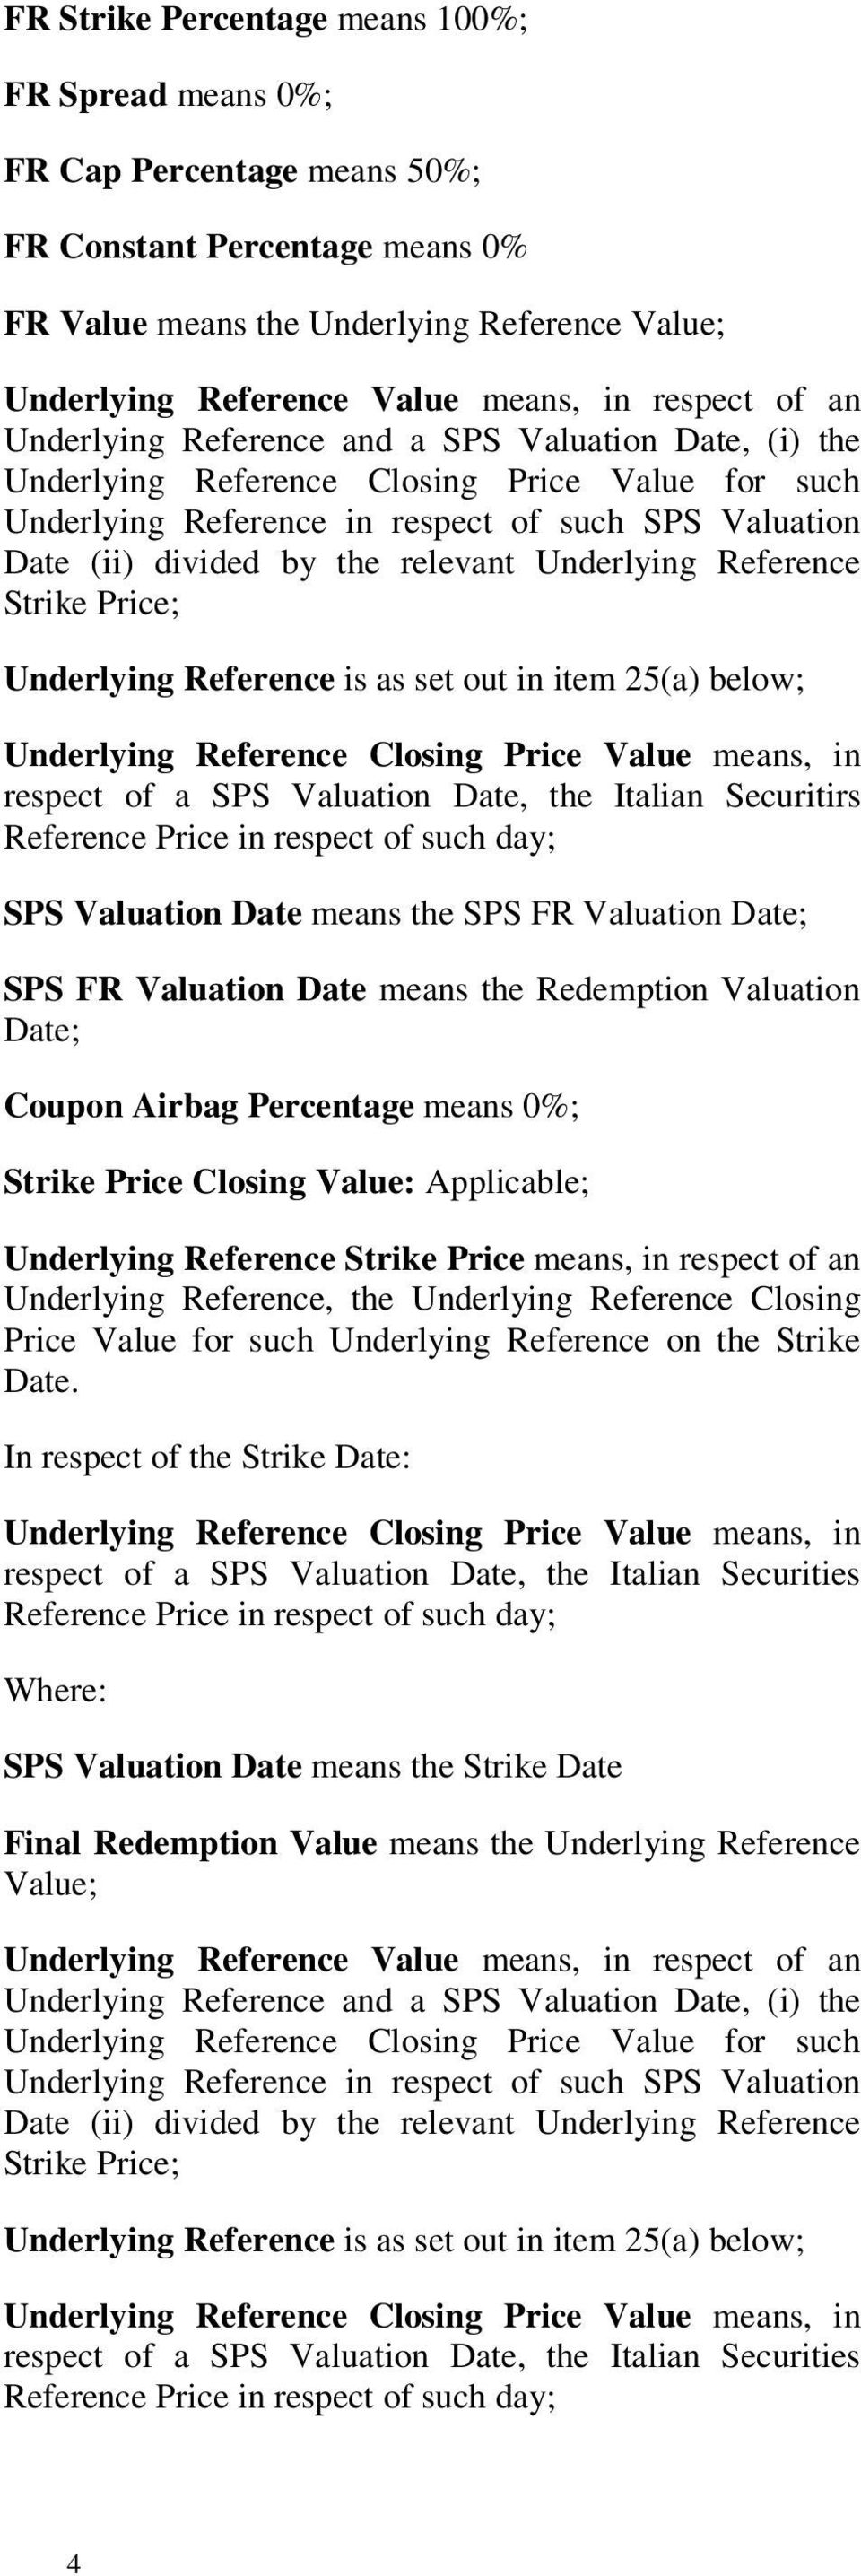 relevant Underlying Reference Strike Price; Underlying Reference is as set out in item 25(a) below; Underlying Reference Closing Price Value means, in respect of a SPS Valuation Date, the Italian